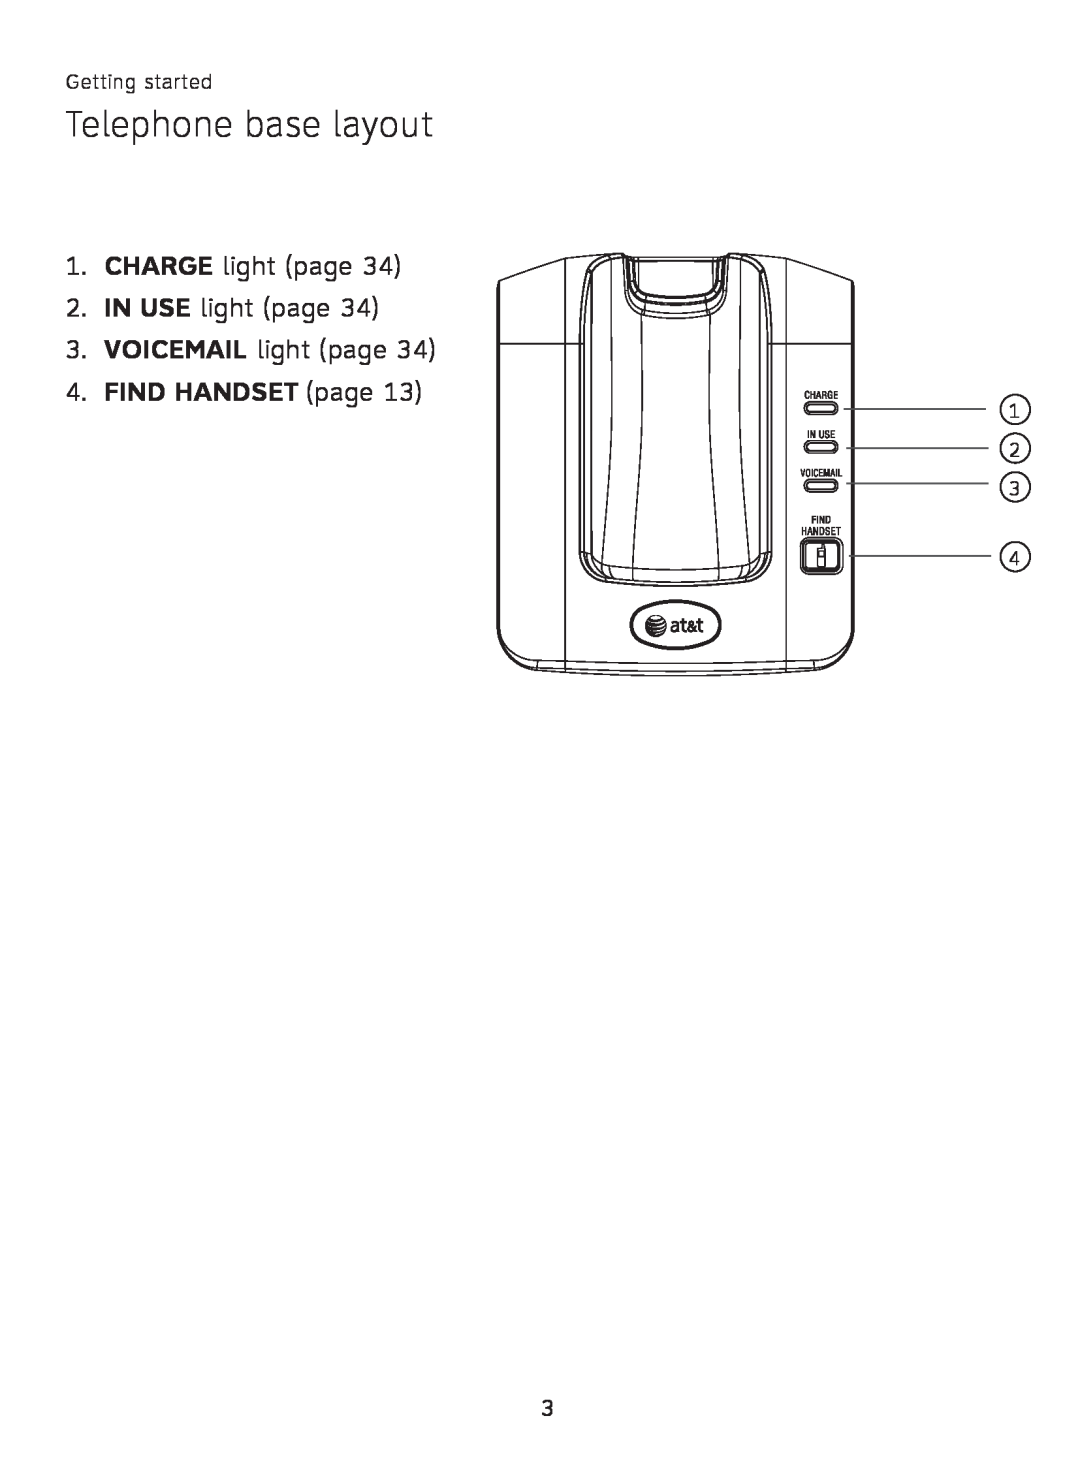 AT&T AT3111-2 user manual Telephone base layout, FIND HANDSET page 